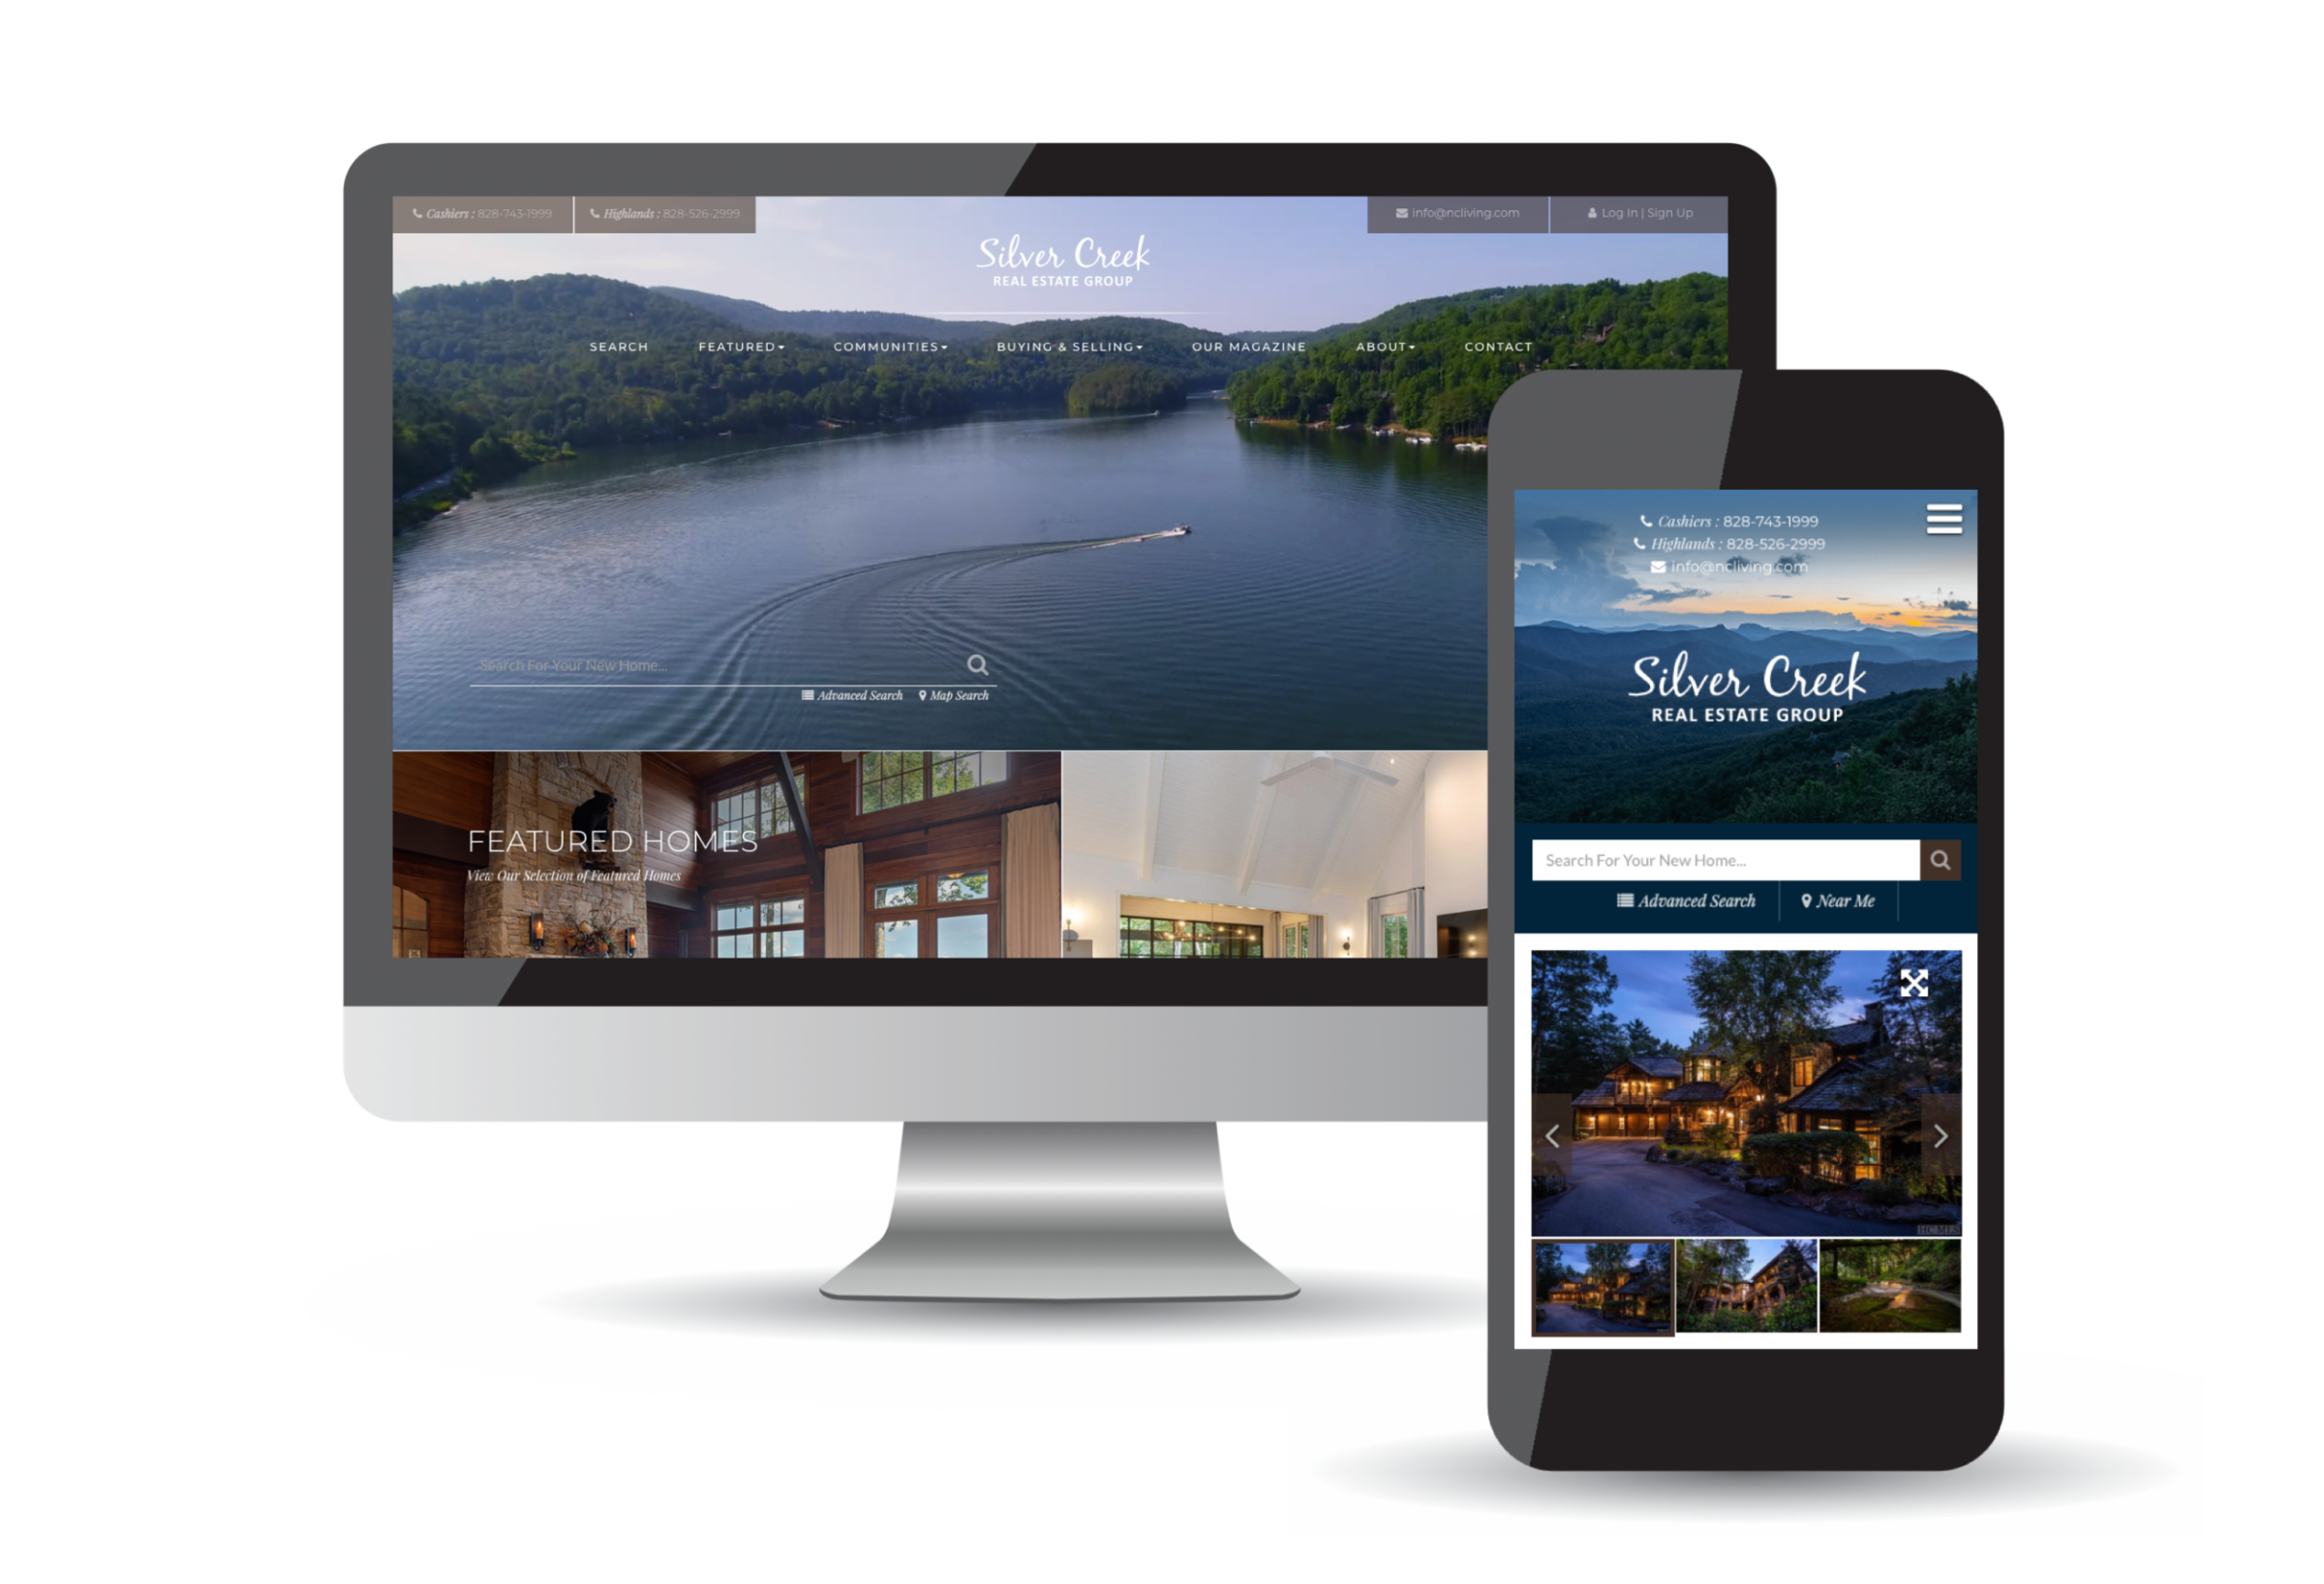 silver creek realty group website on desktop and mobile phone